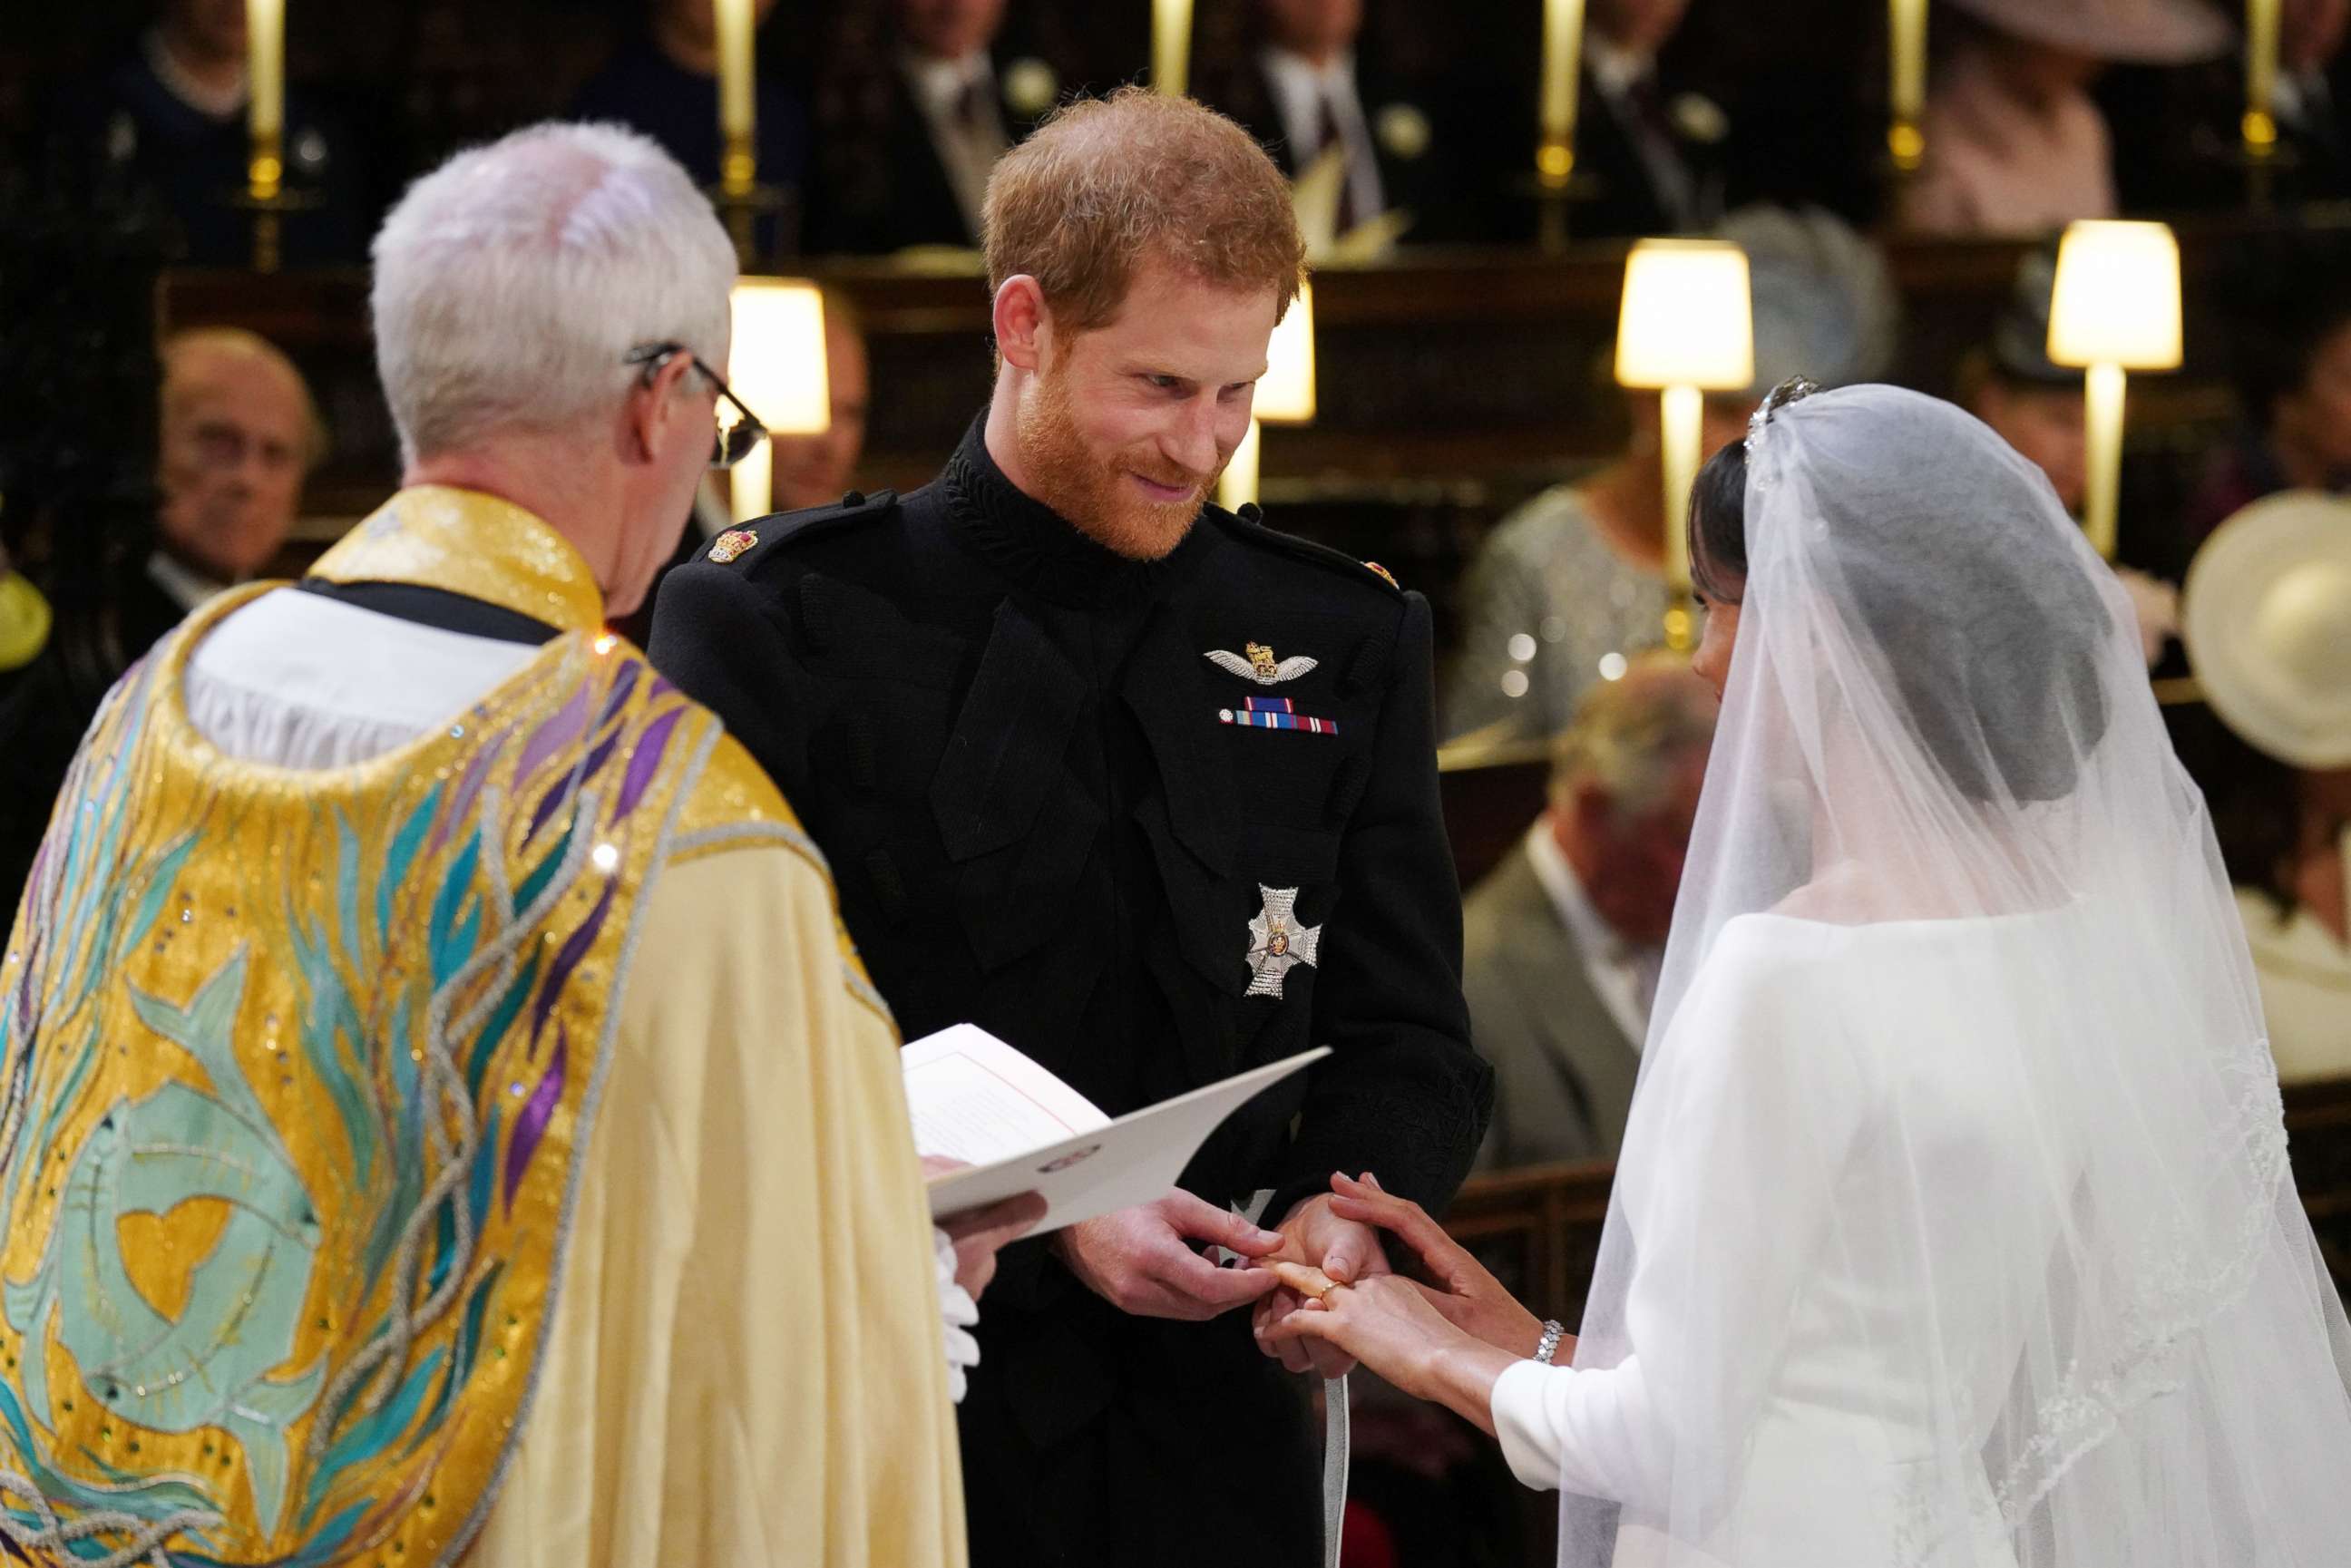 PHOTO: Prince Harry, Duke of Sussex, places the wedding ring on Meghan Markle during their wedding ceremony in St George's Chapel, Windsor Castle, in Windsor, on May 19, 2018. 